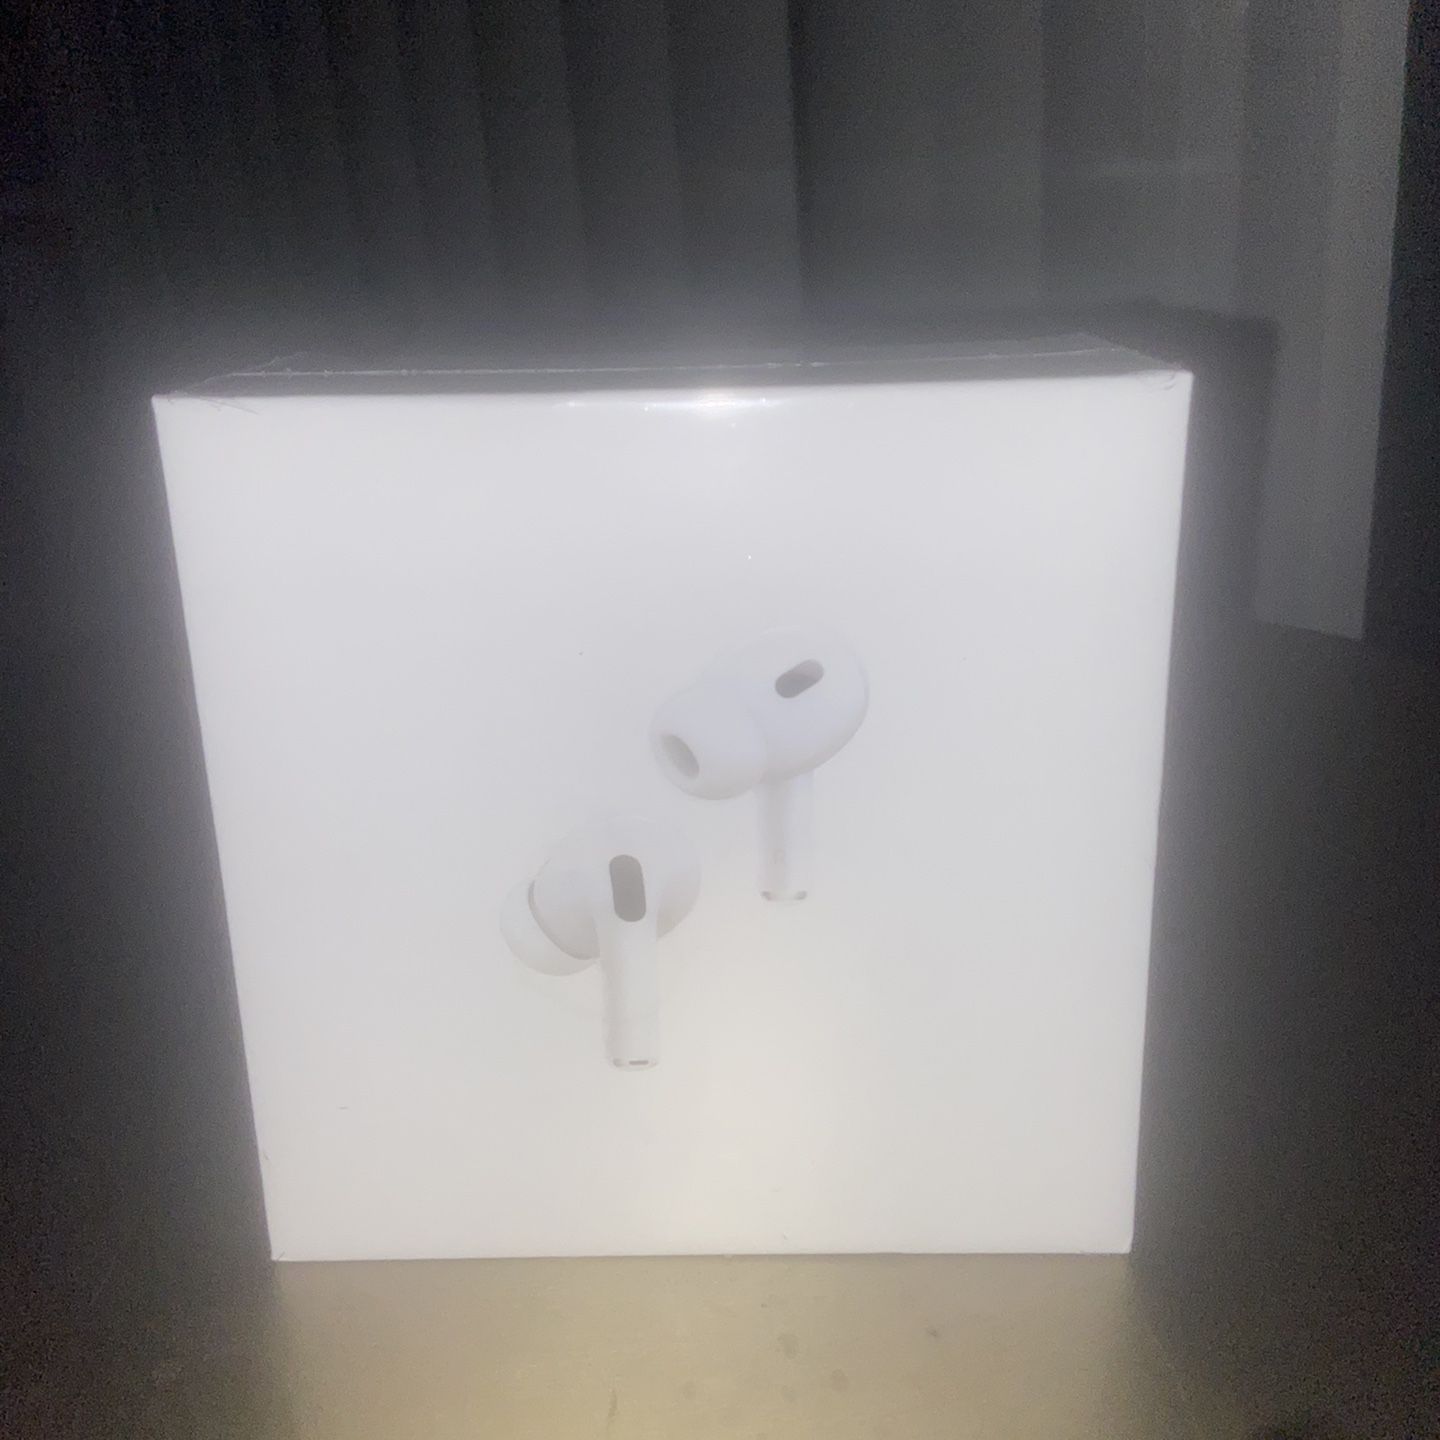 *BEST OFFER*AirPod pros 2nd gen BRAND NEW (NEGOTIABLE)